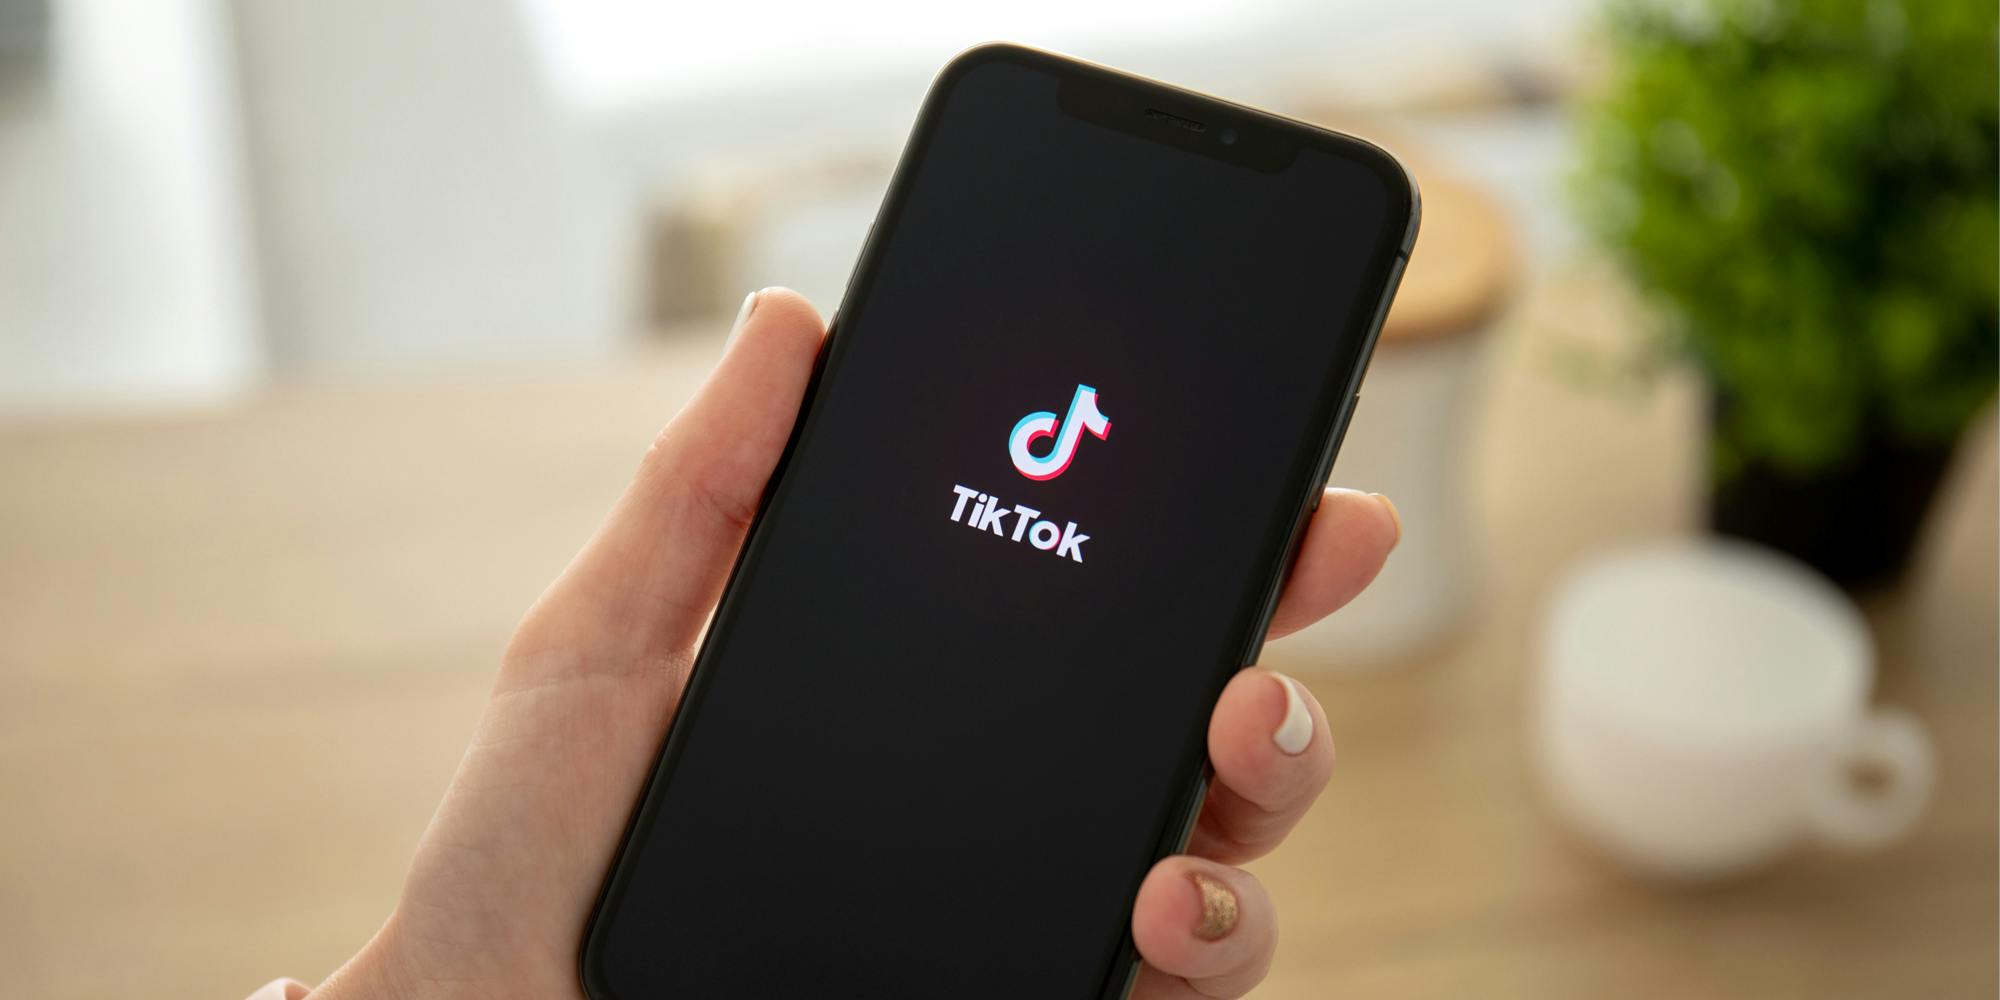 TikTok open on phone in hand in front of blurred background